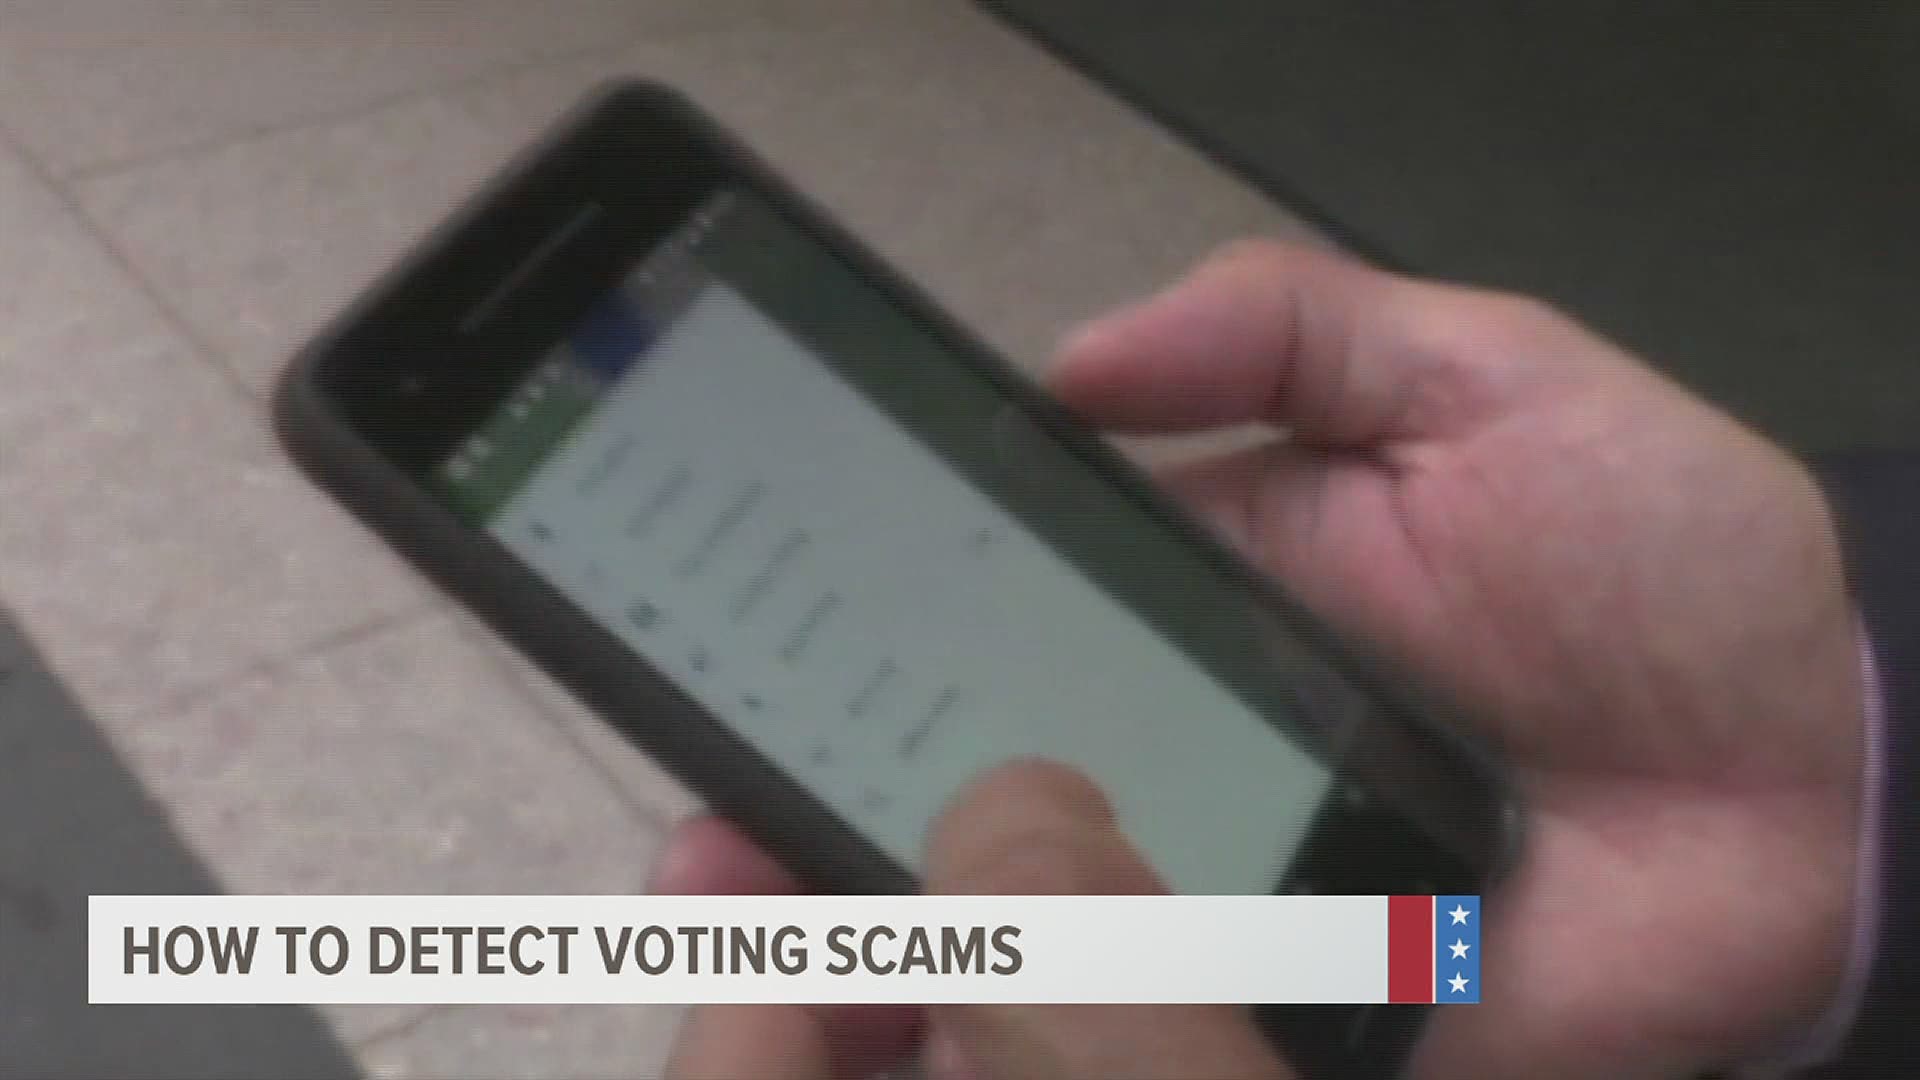 Law enforcement officials are warning voters about scams involving the upcoming election and sharing information on how to protect your personal data.